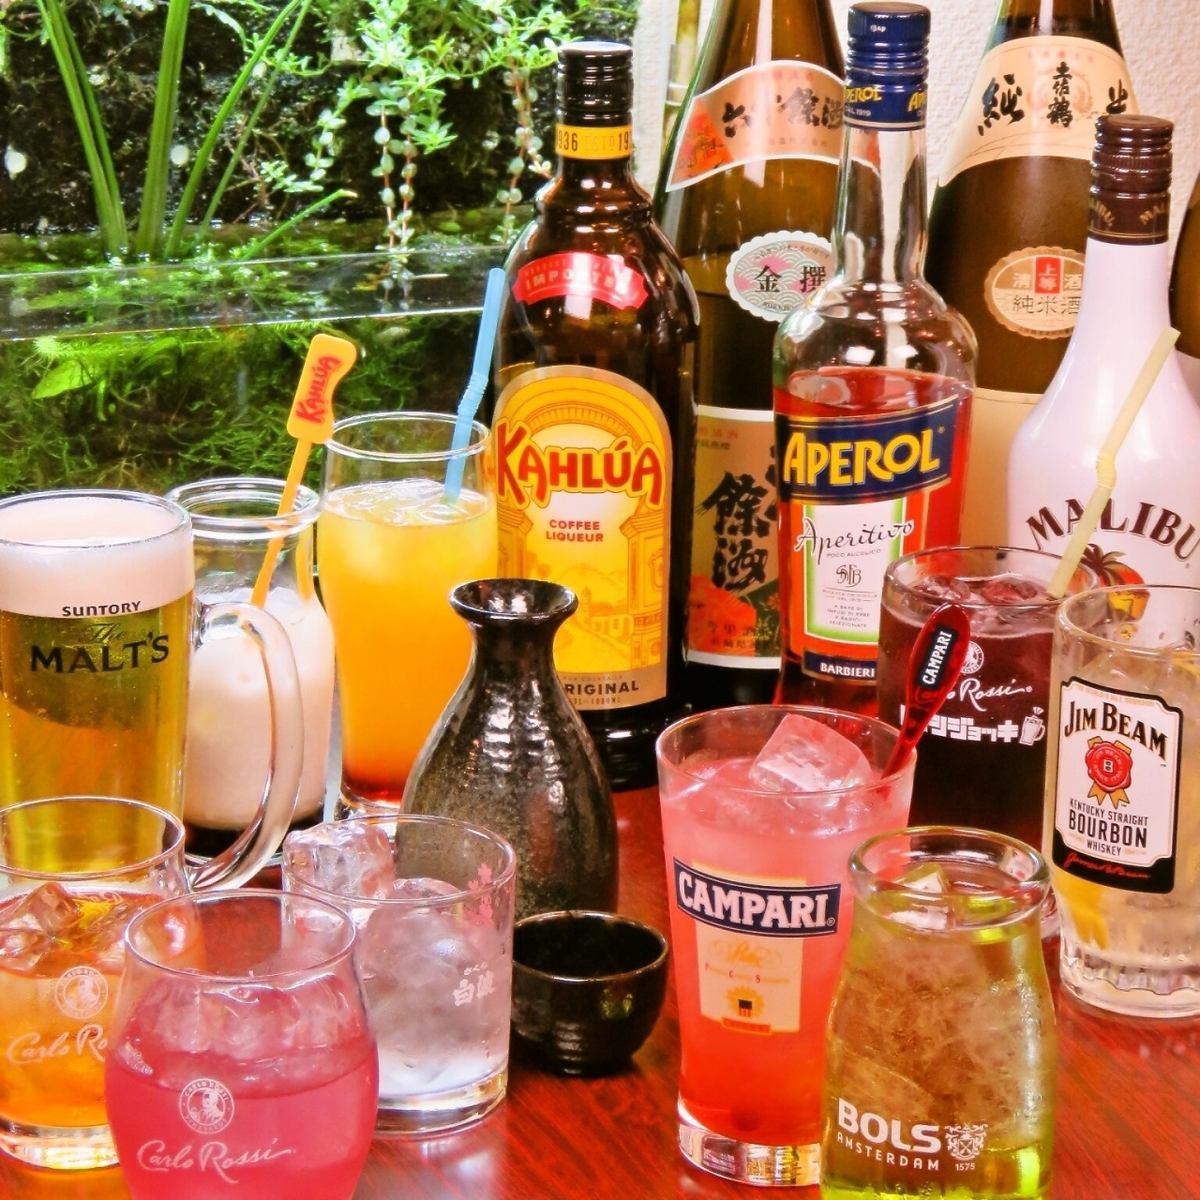 We also offer all-you-can-drink items♪ The appeal of Shushu is its wide variety of drinks!